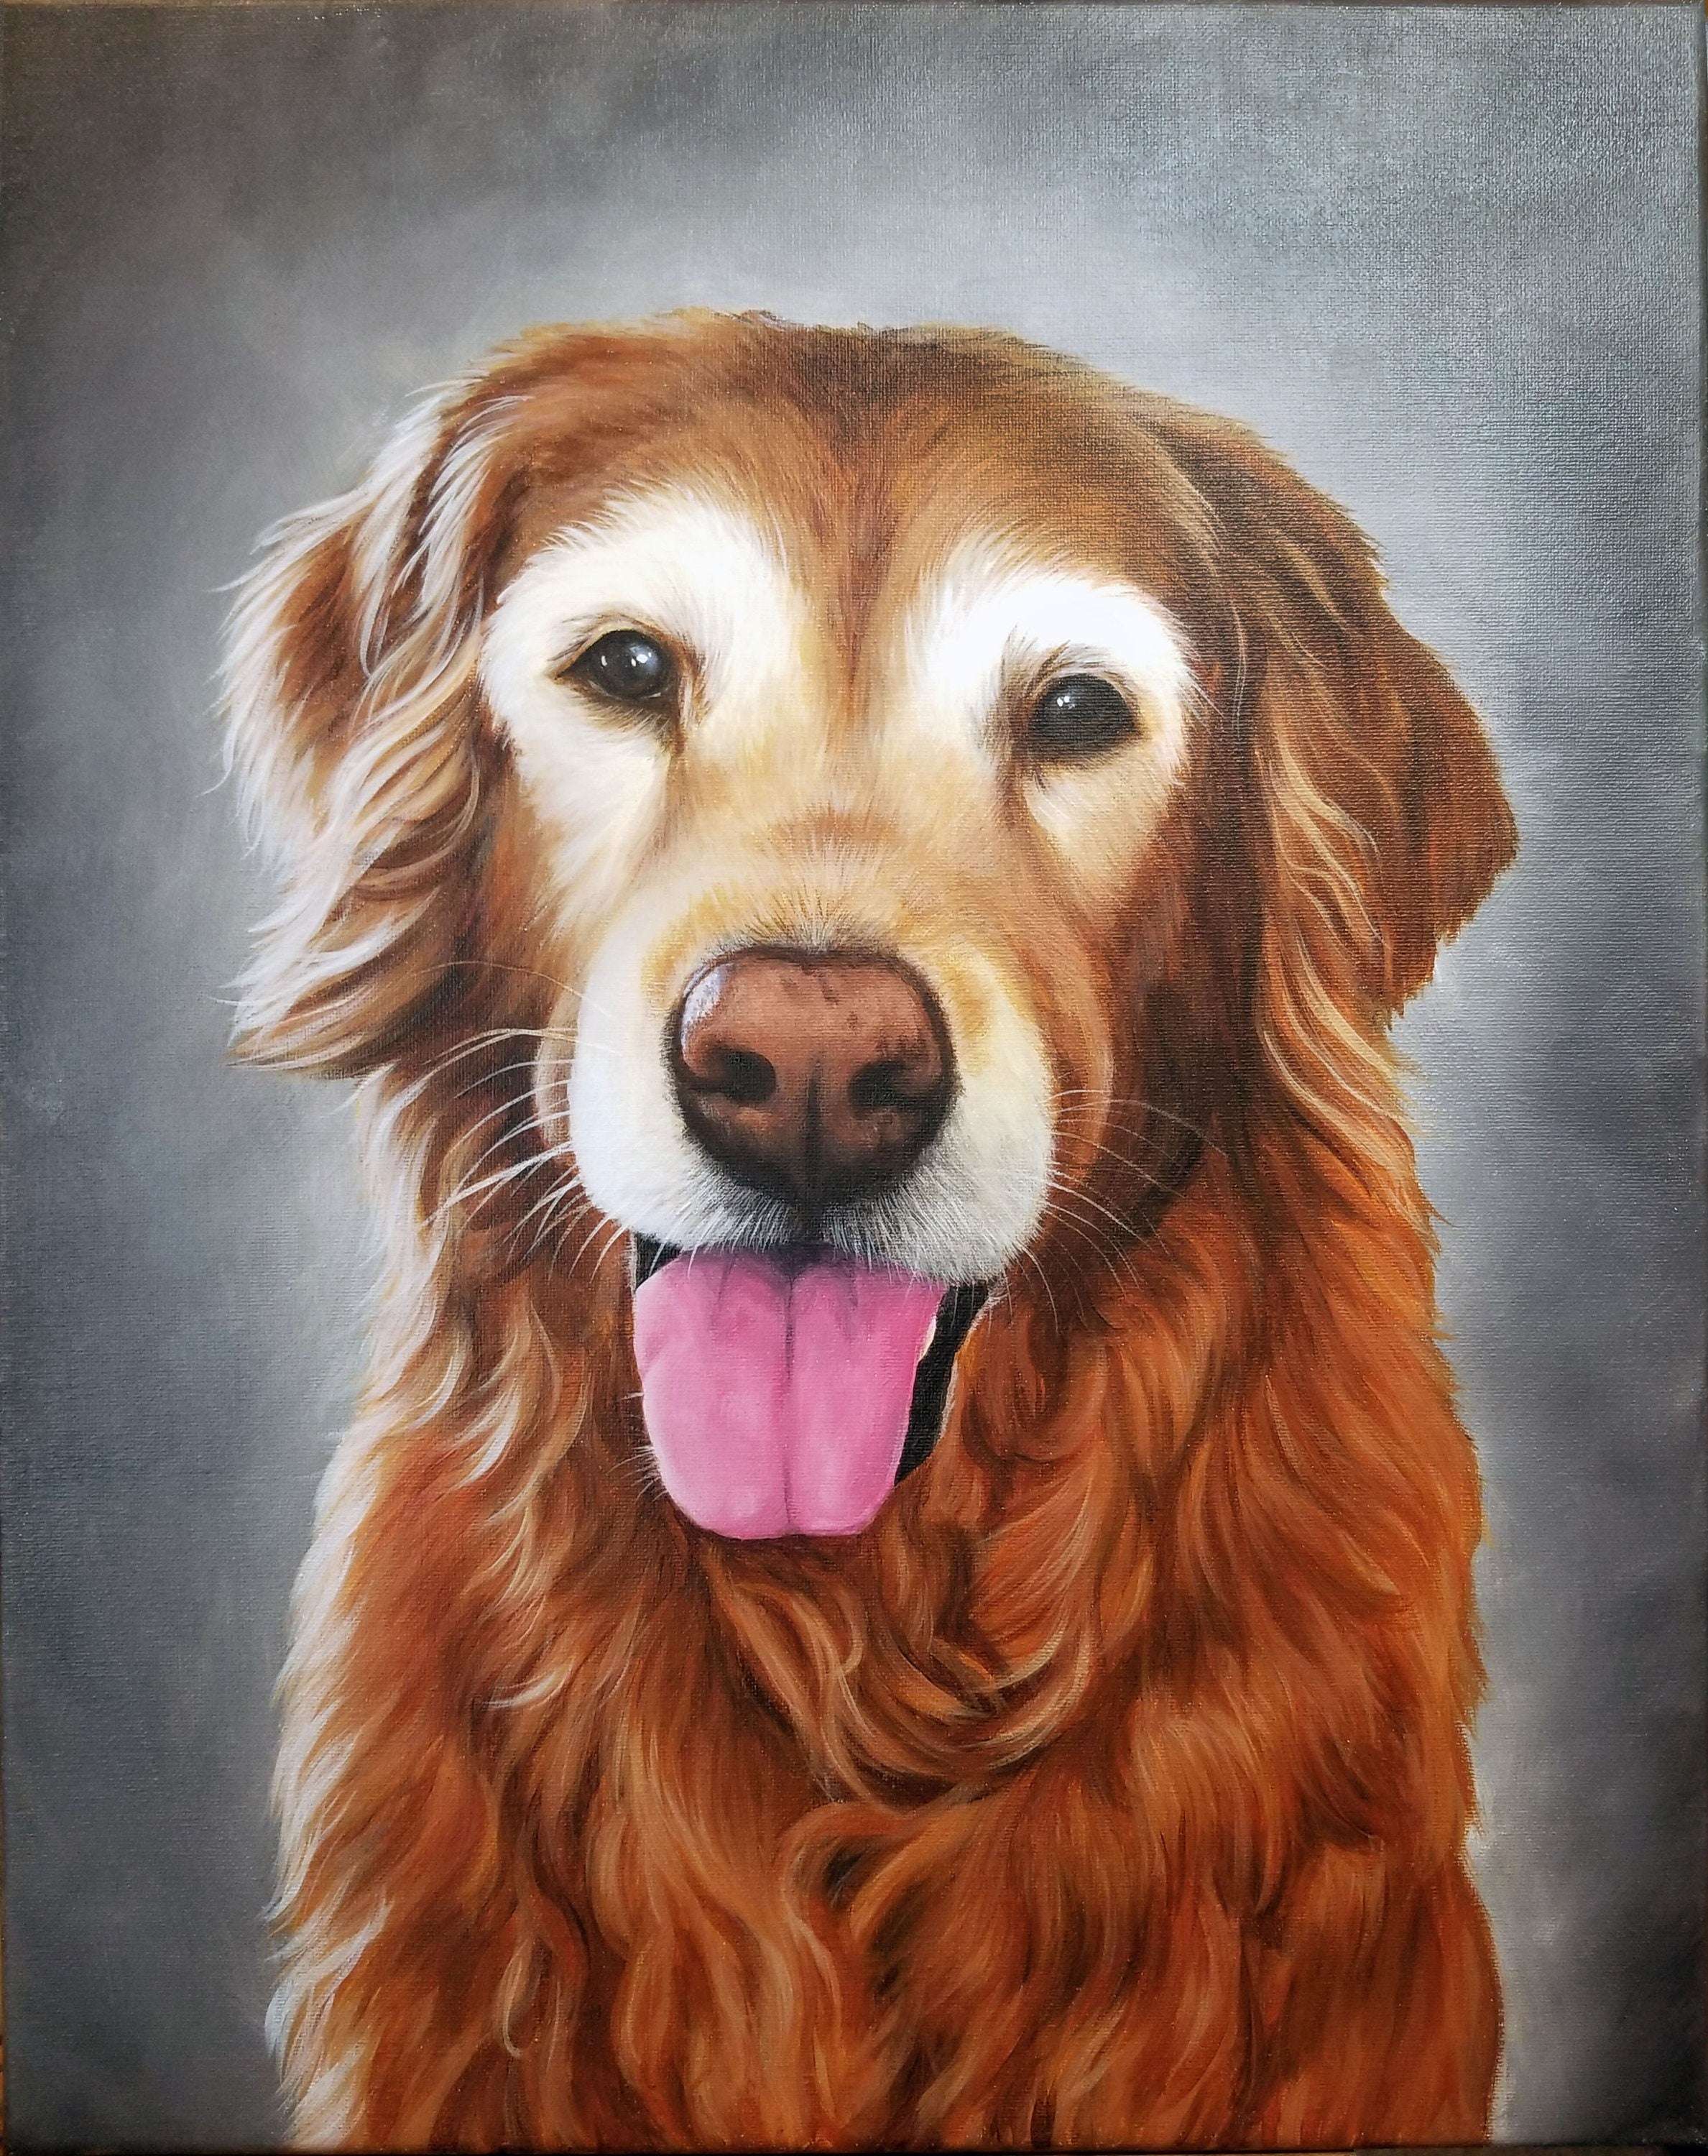 Realistic acrylic pet portrait painting of a happy golden retriever with its tongue out, set against a grey background.